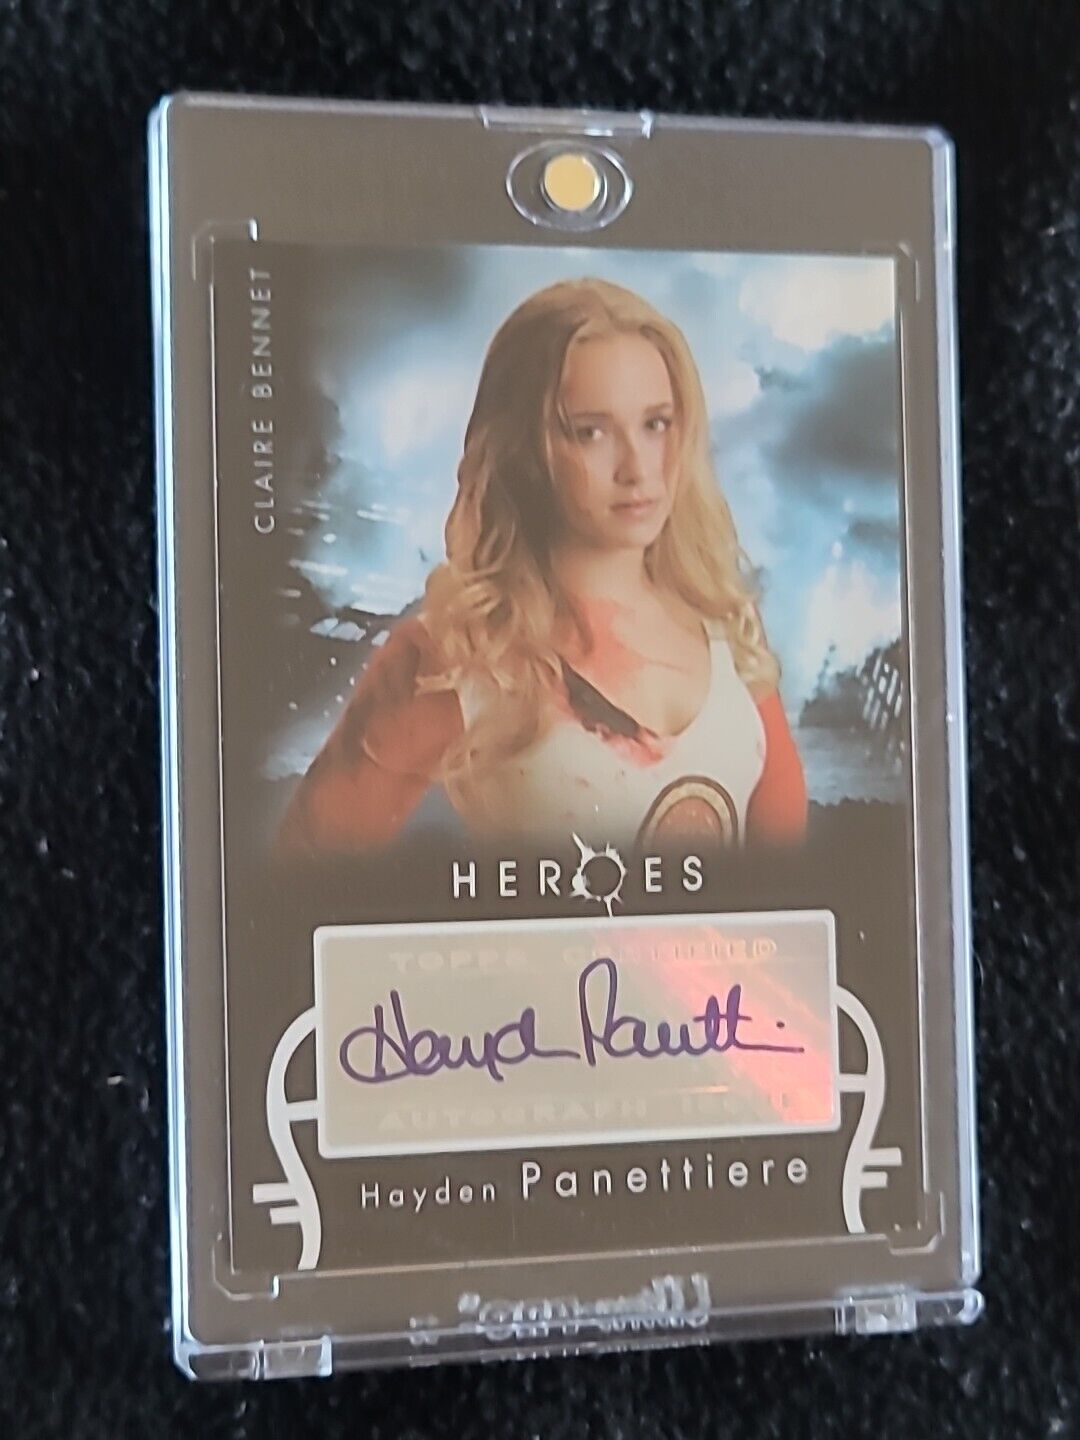 2008 TOPPS HEROES HAYDEN PANETTIERE CLAIRE SERIES 1 RC ROOKIE AUTO AUTOGRAPH SP